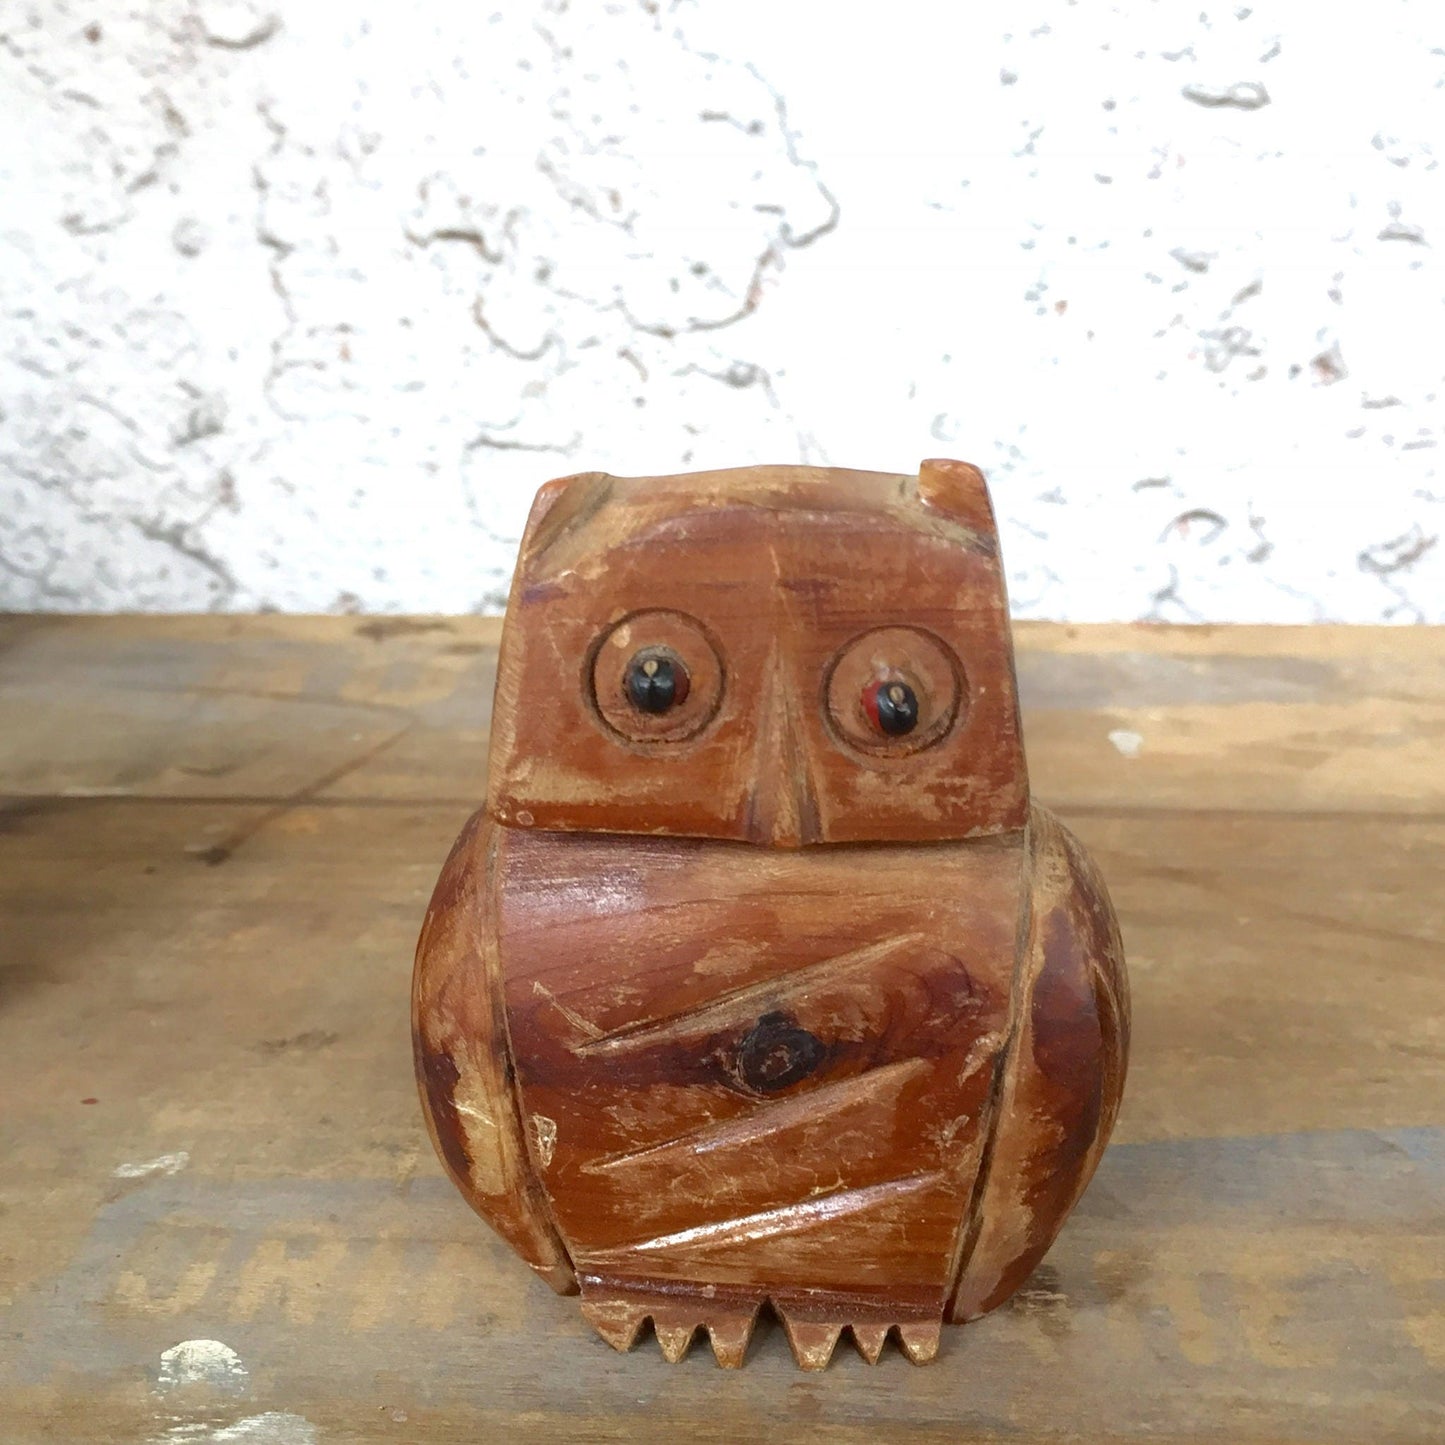 A wooden carved owl figure with large eyes, serving as a vintage pencil or pen holder, an example of folk art tramp art style carving, suitable as a back-to-school teacher's gift or desk organizer.